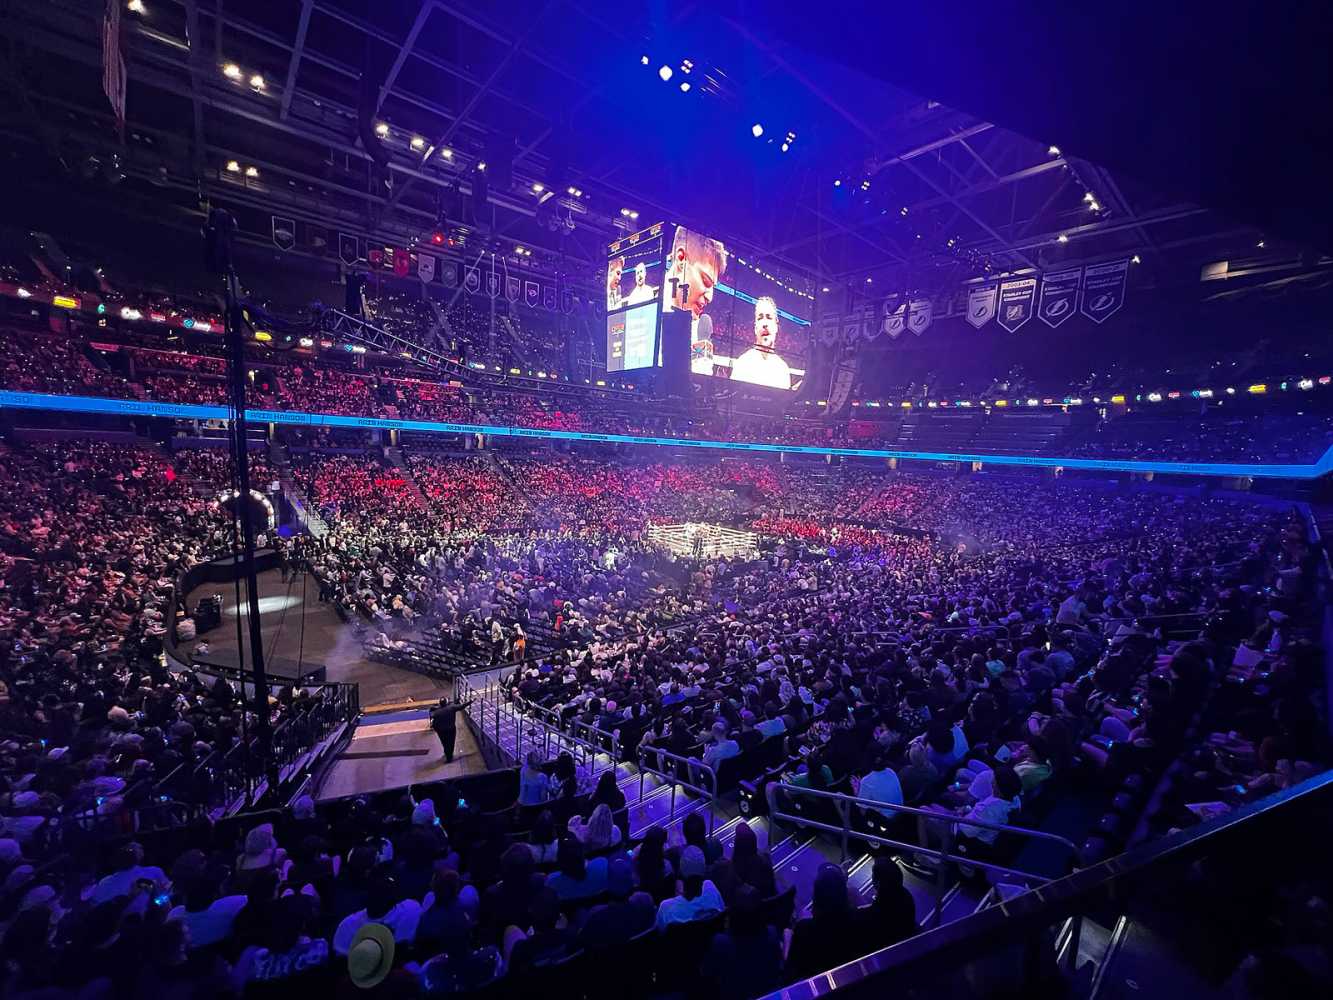 The celebrity influencer boxing event welcomed 30,000 spectators to the arena